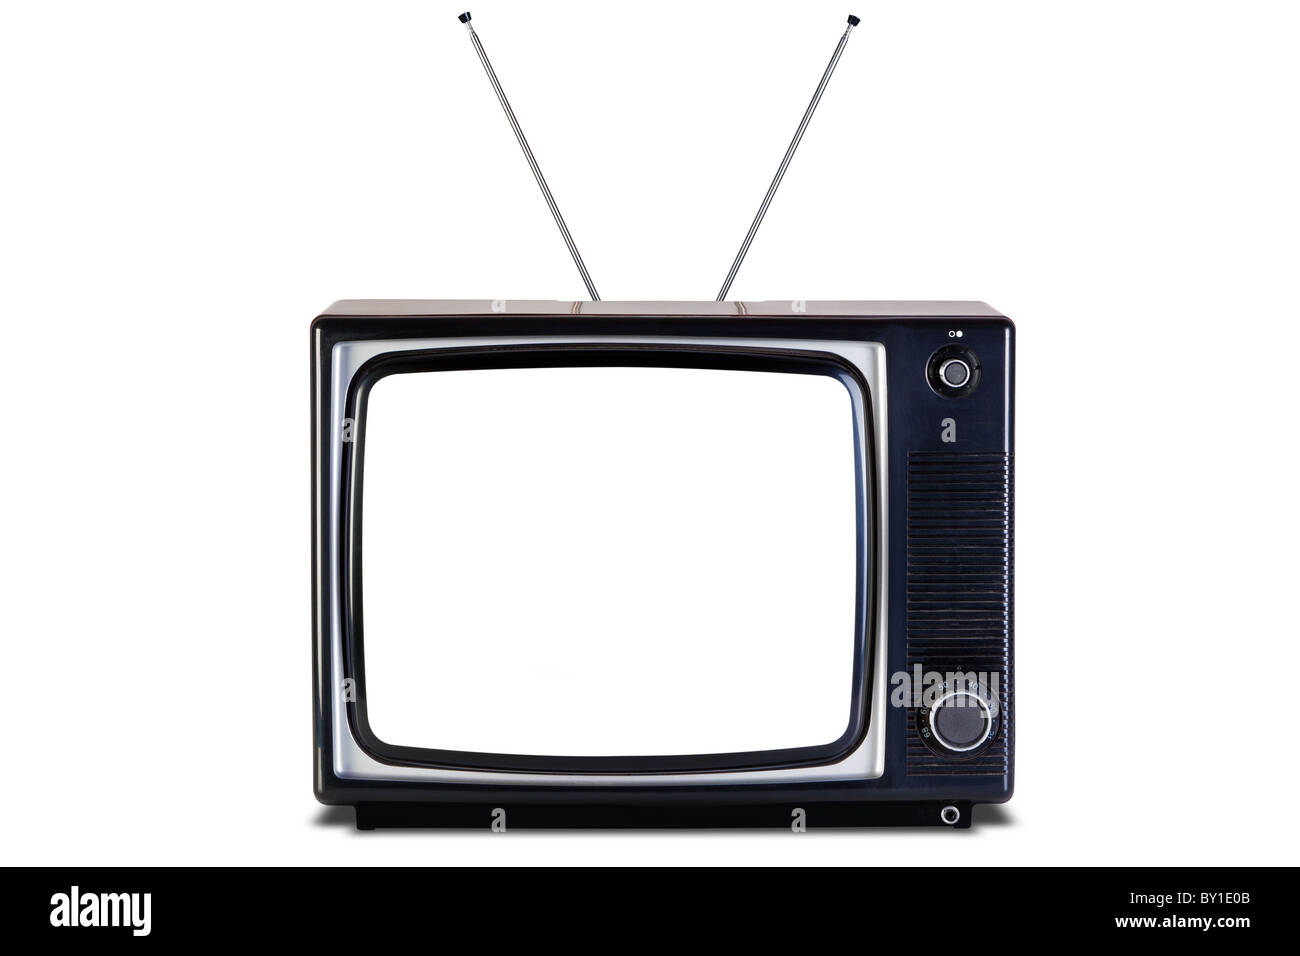 Old retro black and white tv set, blank screen,isolated on a white background with slight shadow, with clipping paths for televi Stock Photo